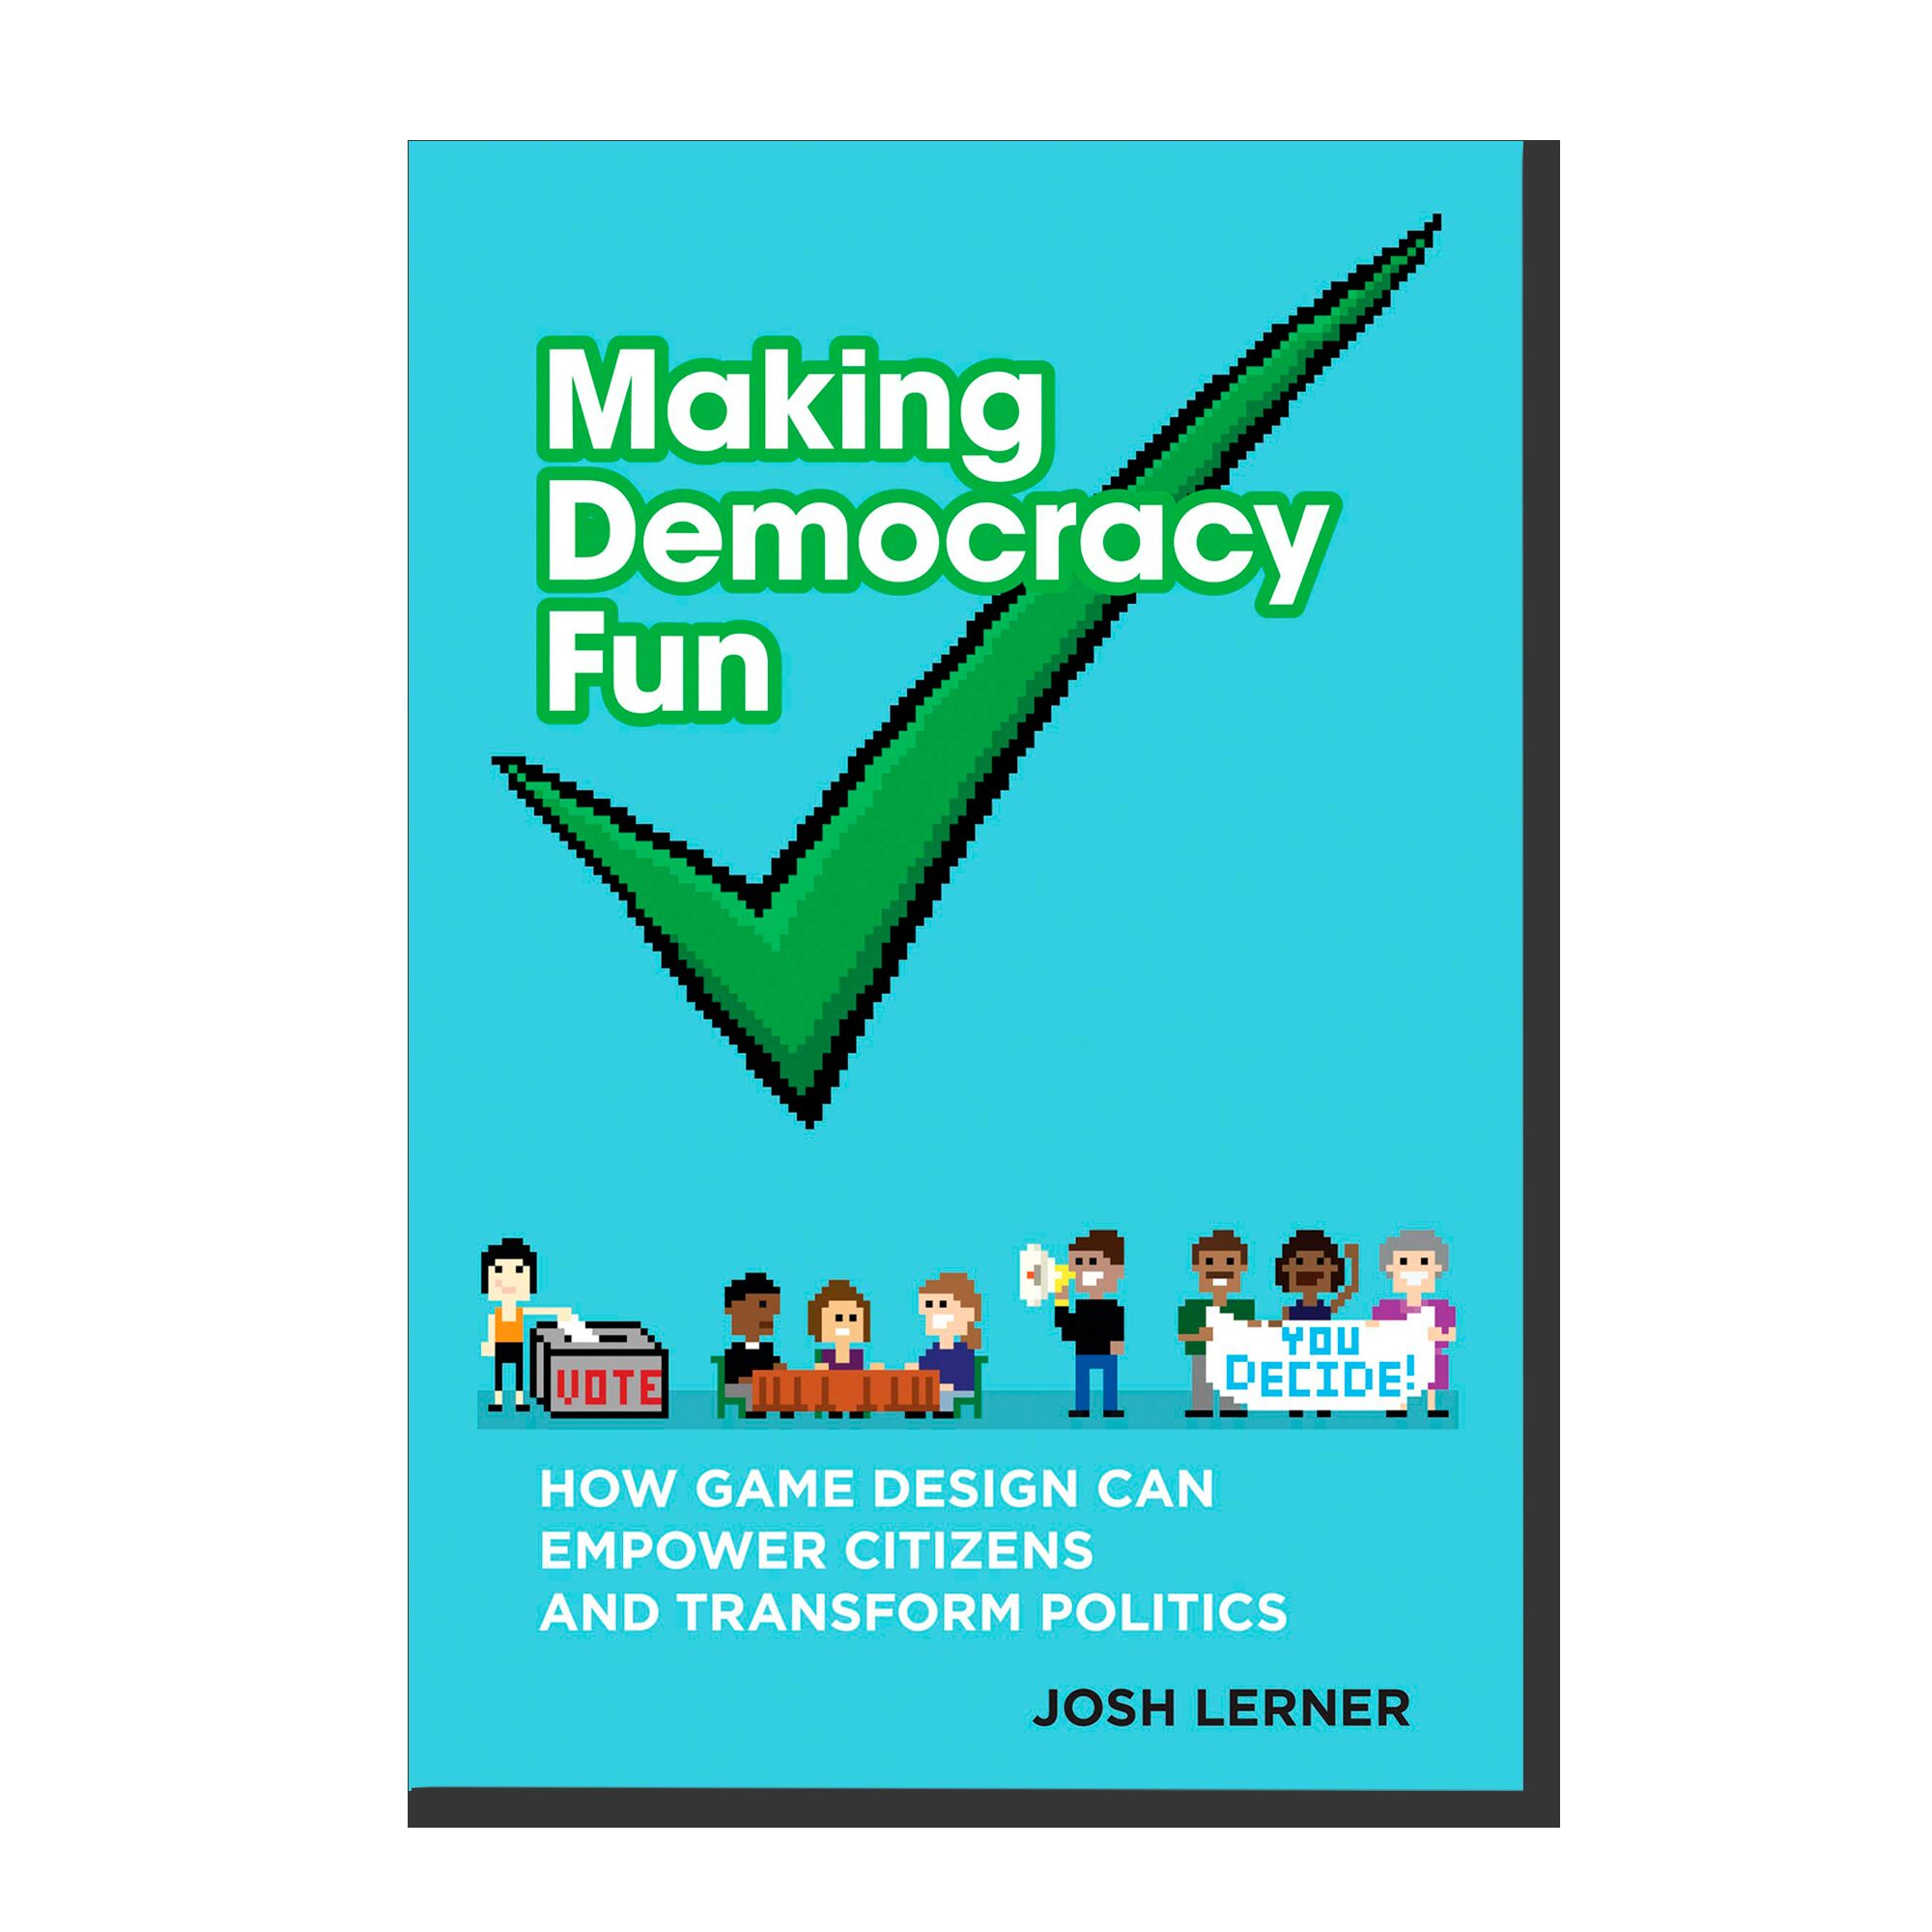 Making Democracy Fun: How Game Design Can Empower Citizens and Transform Politics